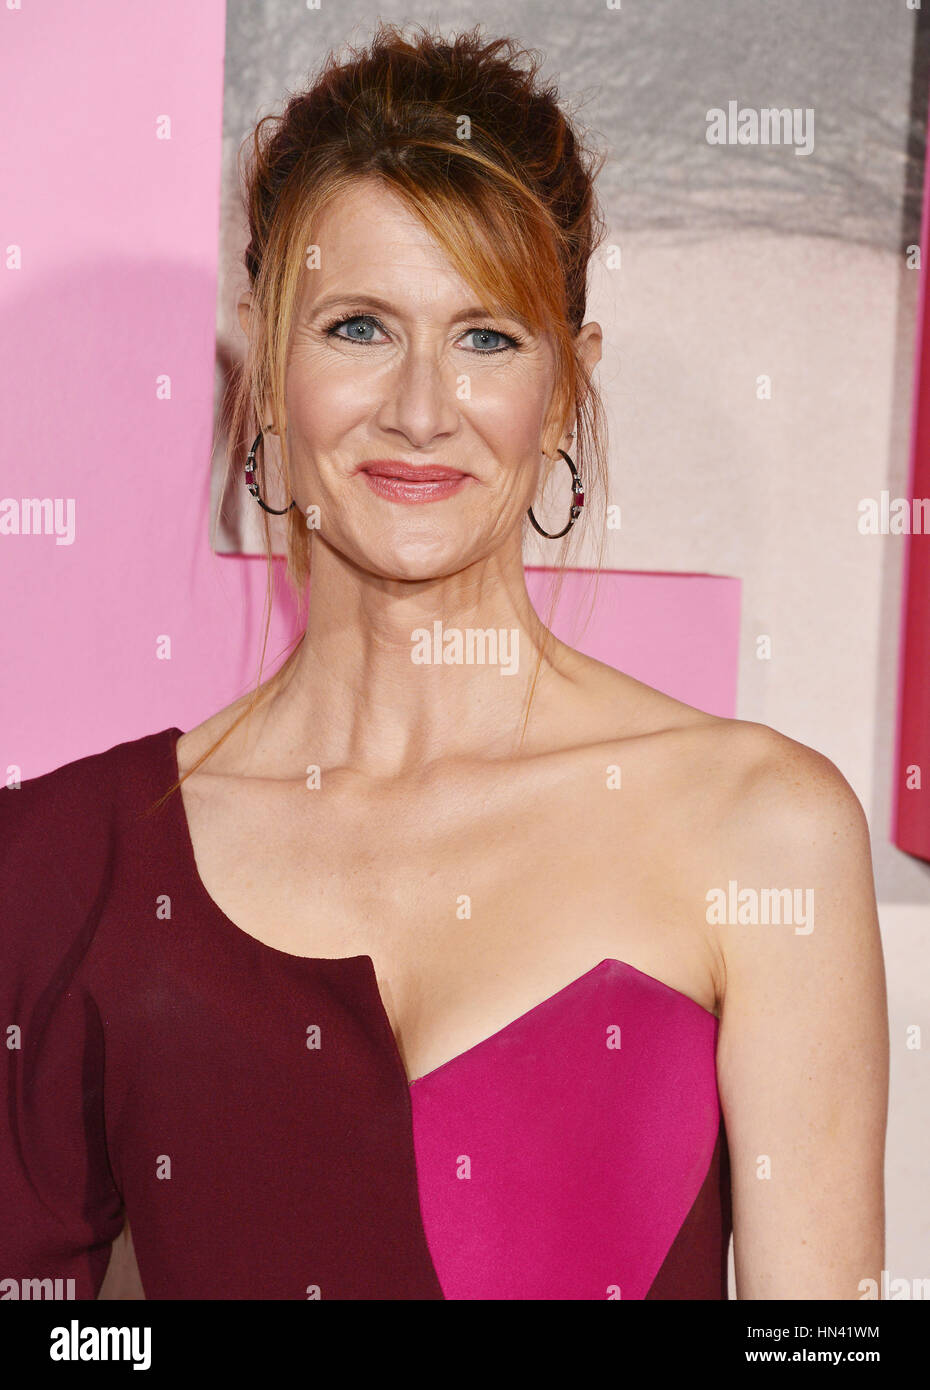 Los Angeles, USA. 07th Feb, 2017. Laura Dern 076 arriving at the Big Little Lies premiere at the TCL Chinese Theatre in Los Angeles. February 7, 2017. Credit: Tsuni/USA/Alamy Live News Stock Photo